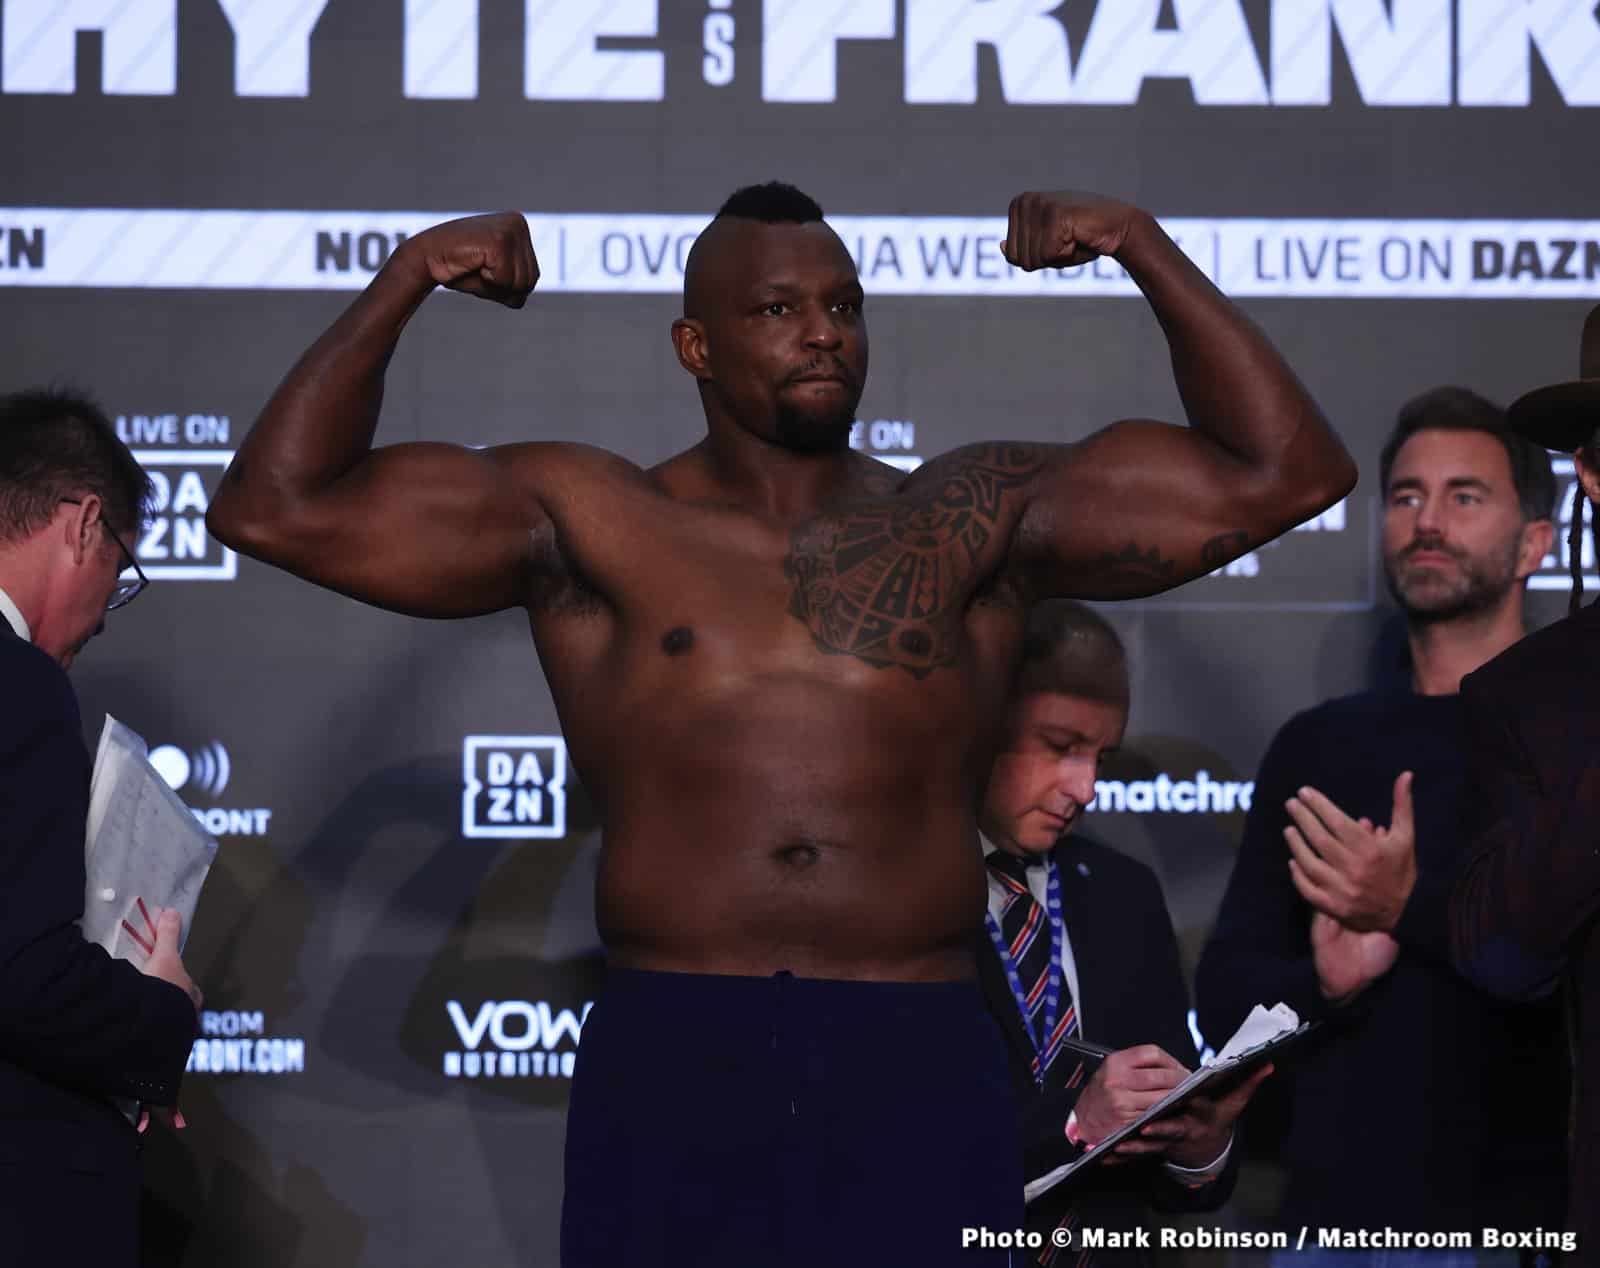 Dillian Whyte amped up for Jermaine Franklin fight